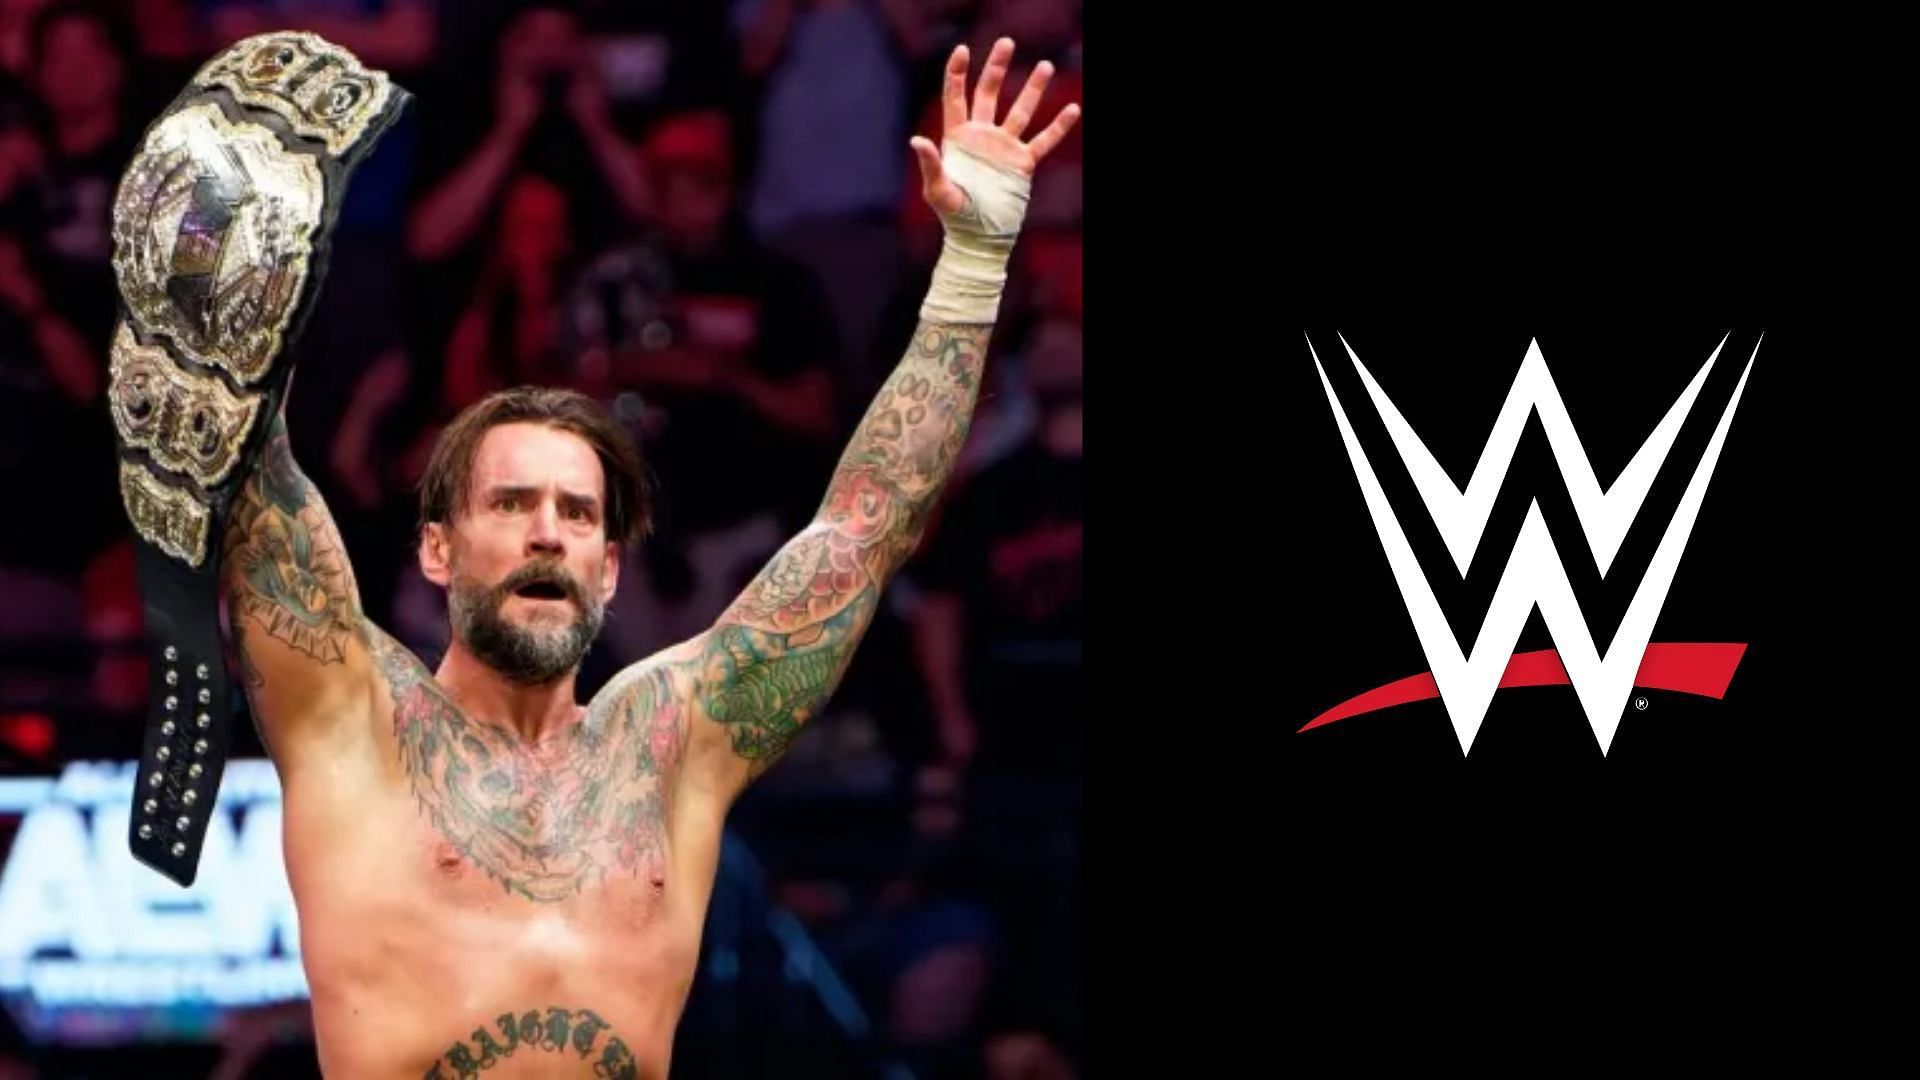 CM Punk was fired from All Elite Wrestling last week